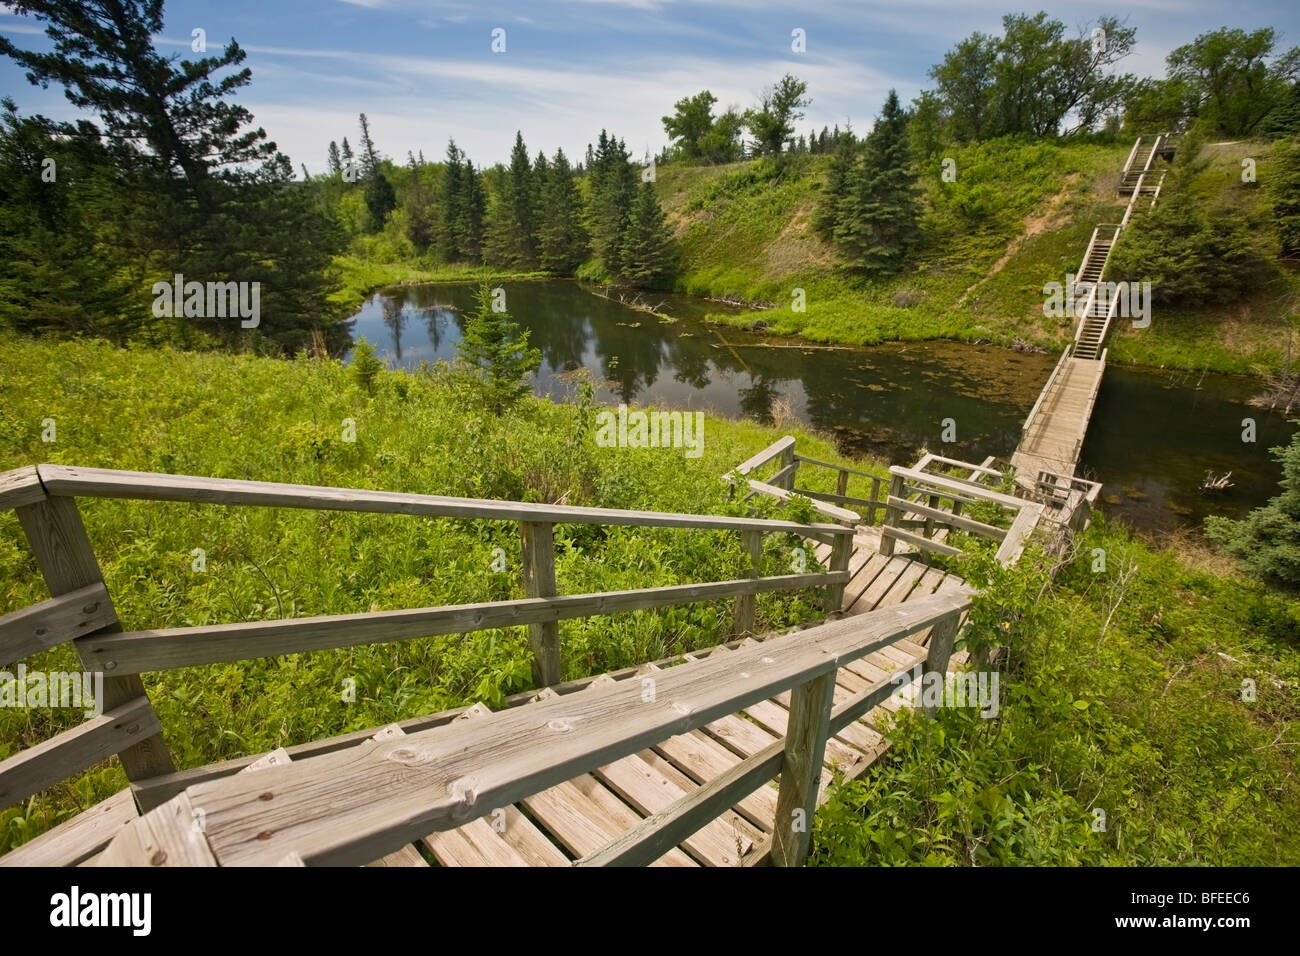 Wooden stairway in Devils Punch Bowl in the Spirit Sands, Spruce Woods Provincial Park, Manitoba, Canada Stock Photo